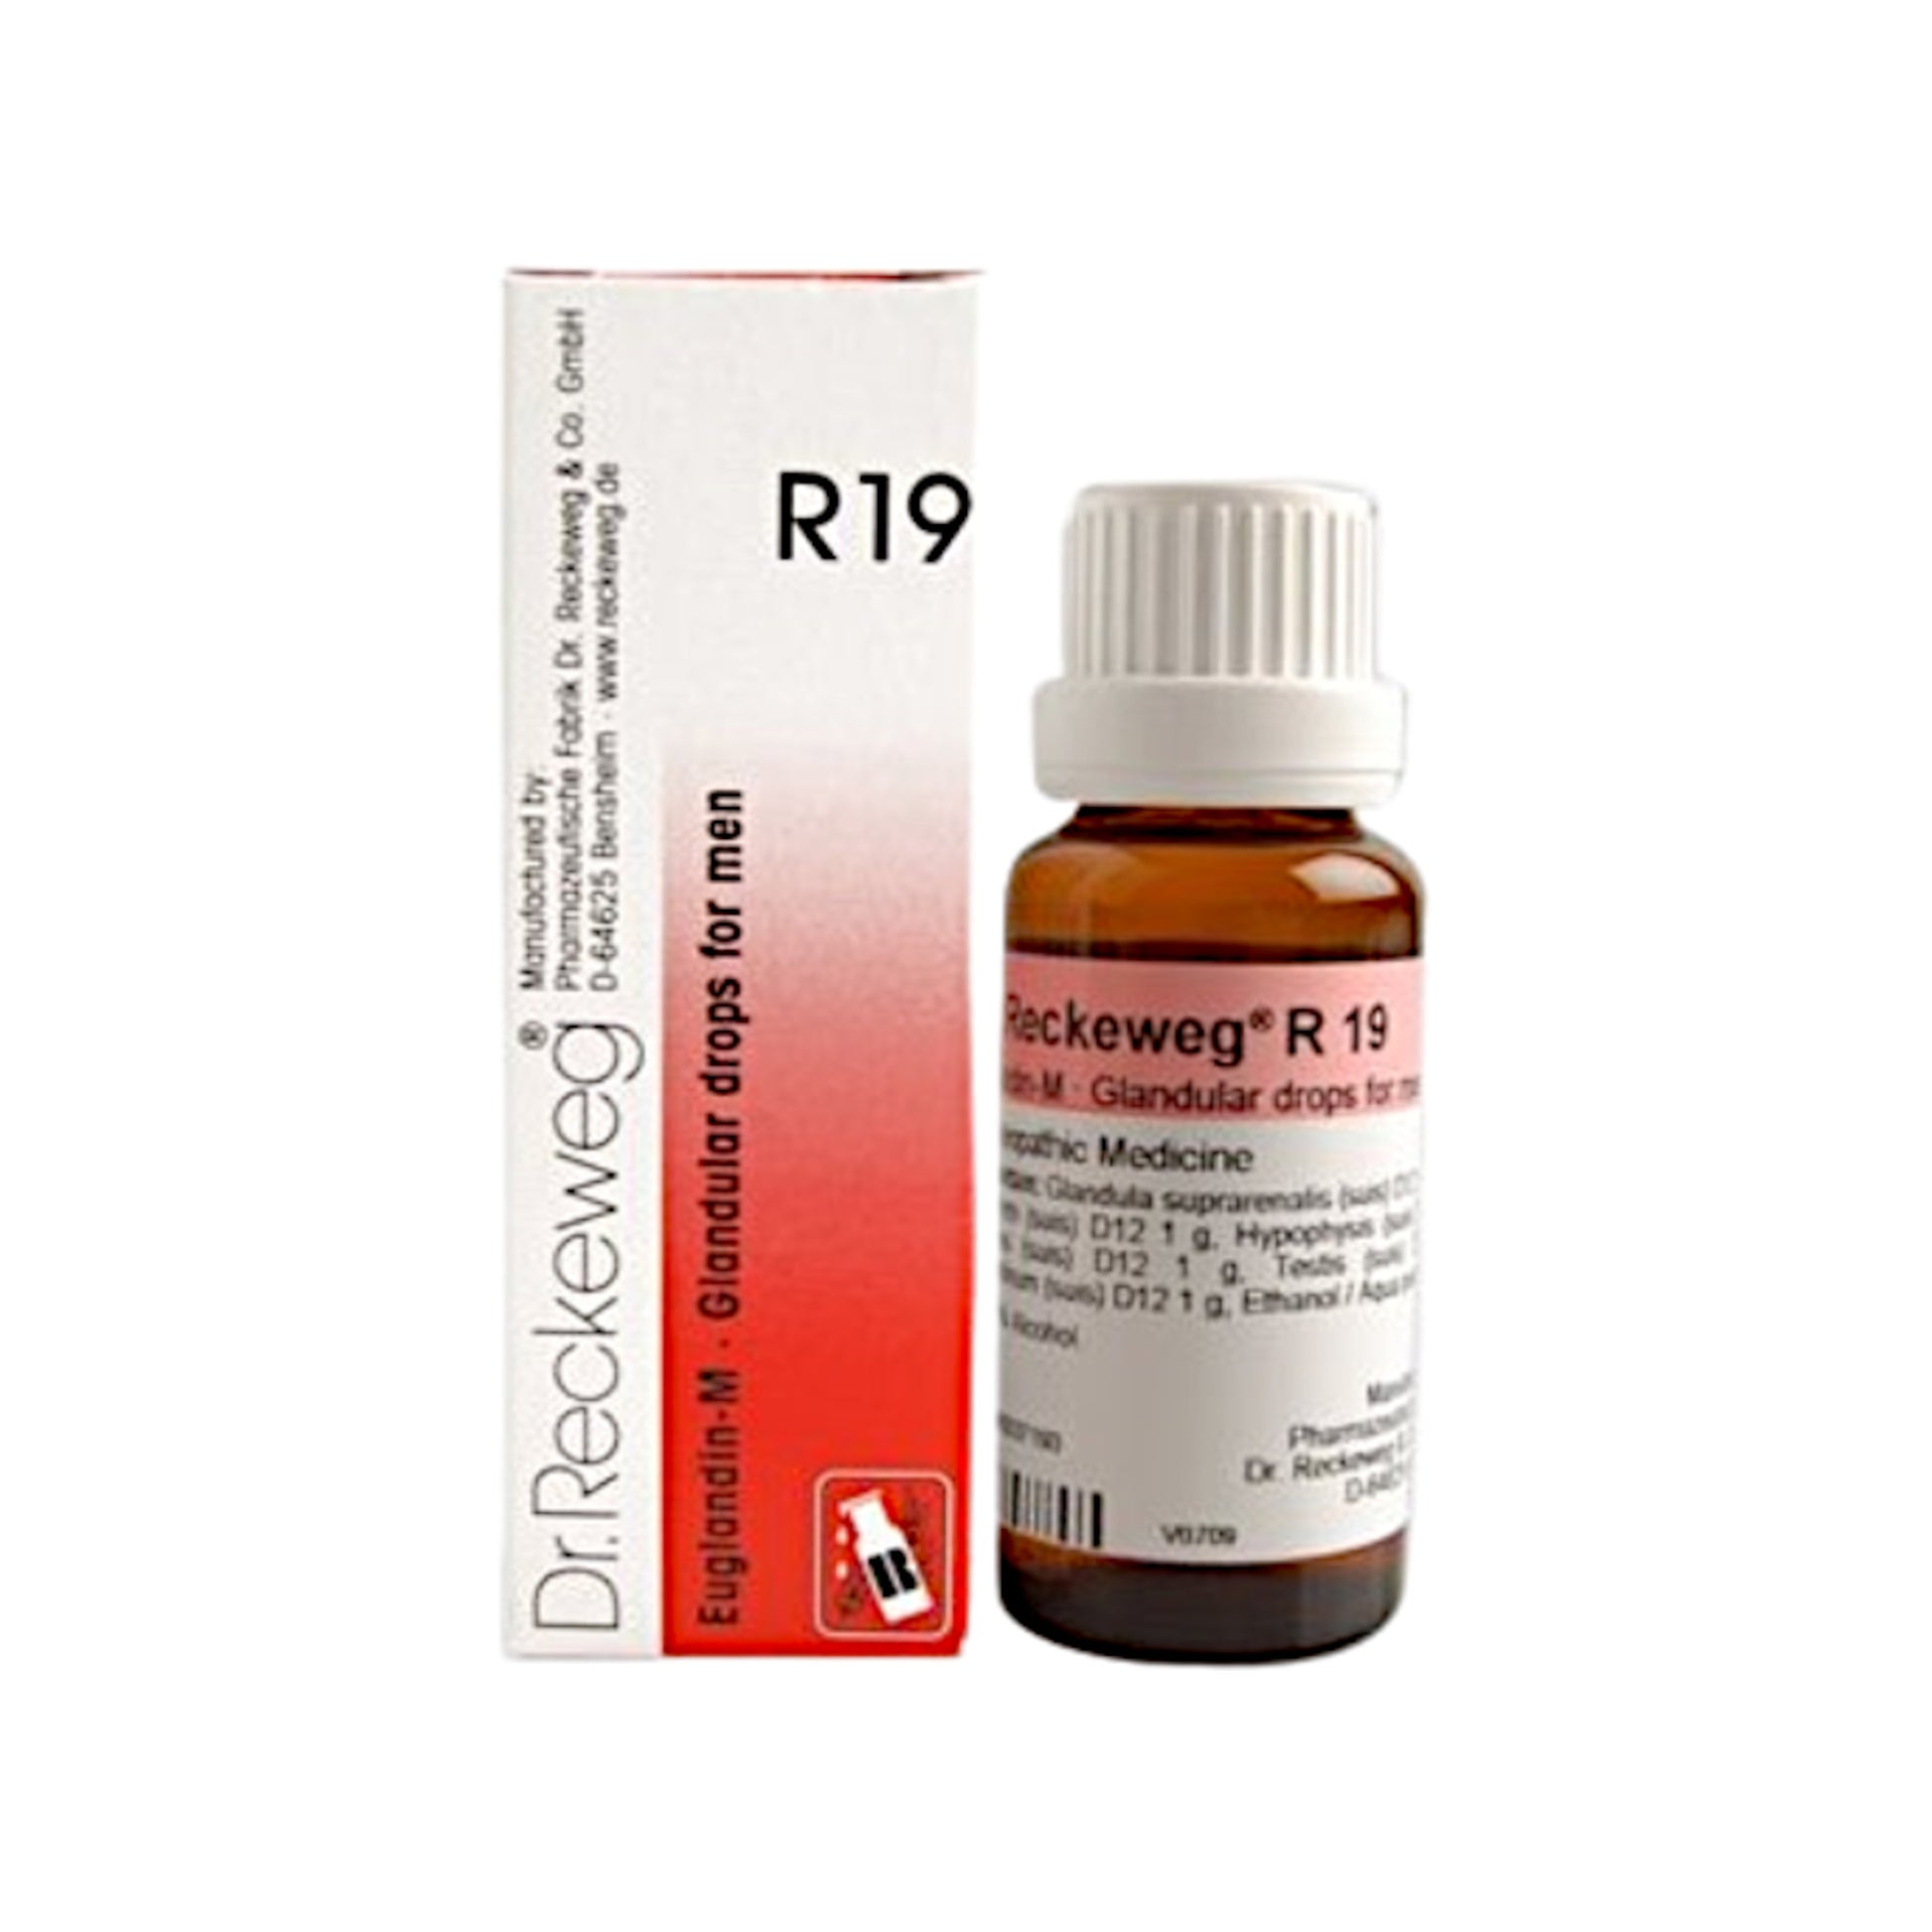 Image for DR. RECKEWEG R19 - Euglandin M Glandular Drops: Homeopathic remedy for endocrine disorders and glandular imbalances in men.